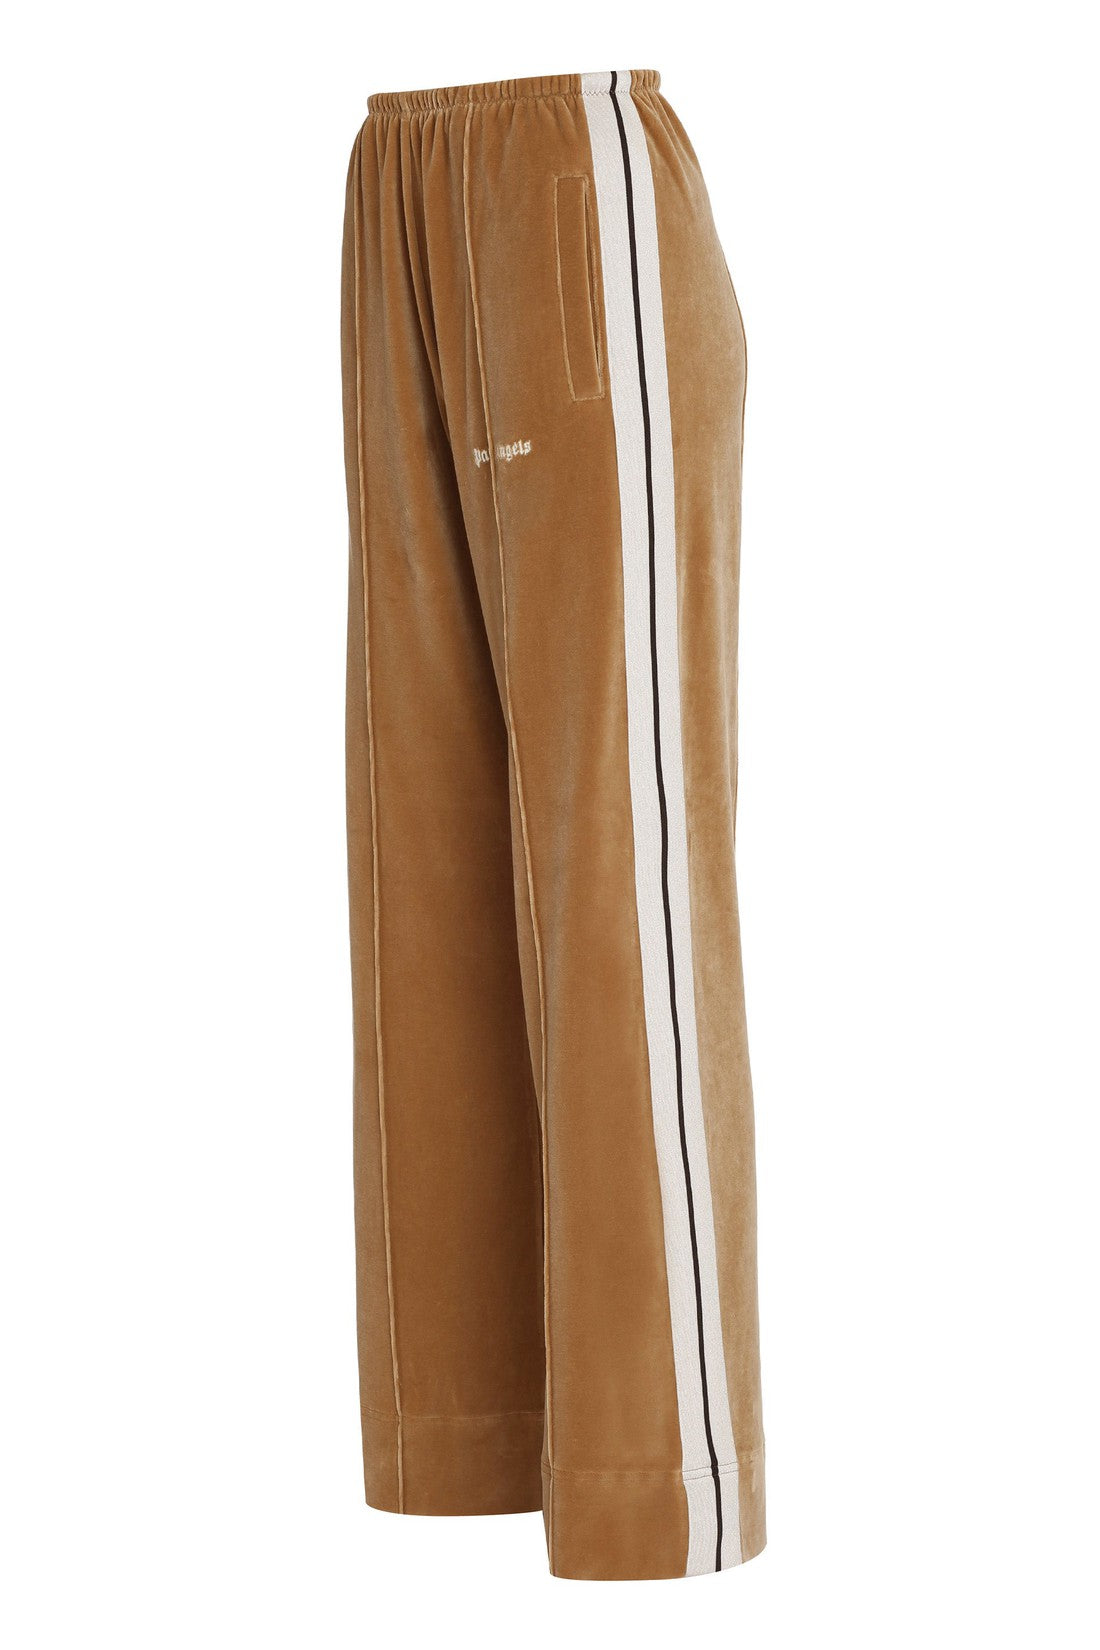 Palm Angels-OUTLET-SALE-Track-pants with contrasting side stripes-ARCHIVIST